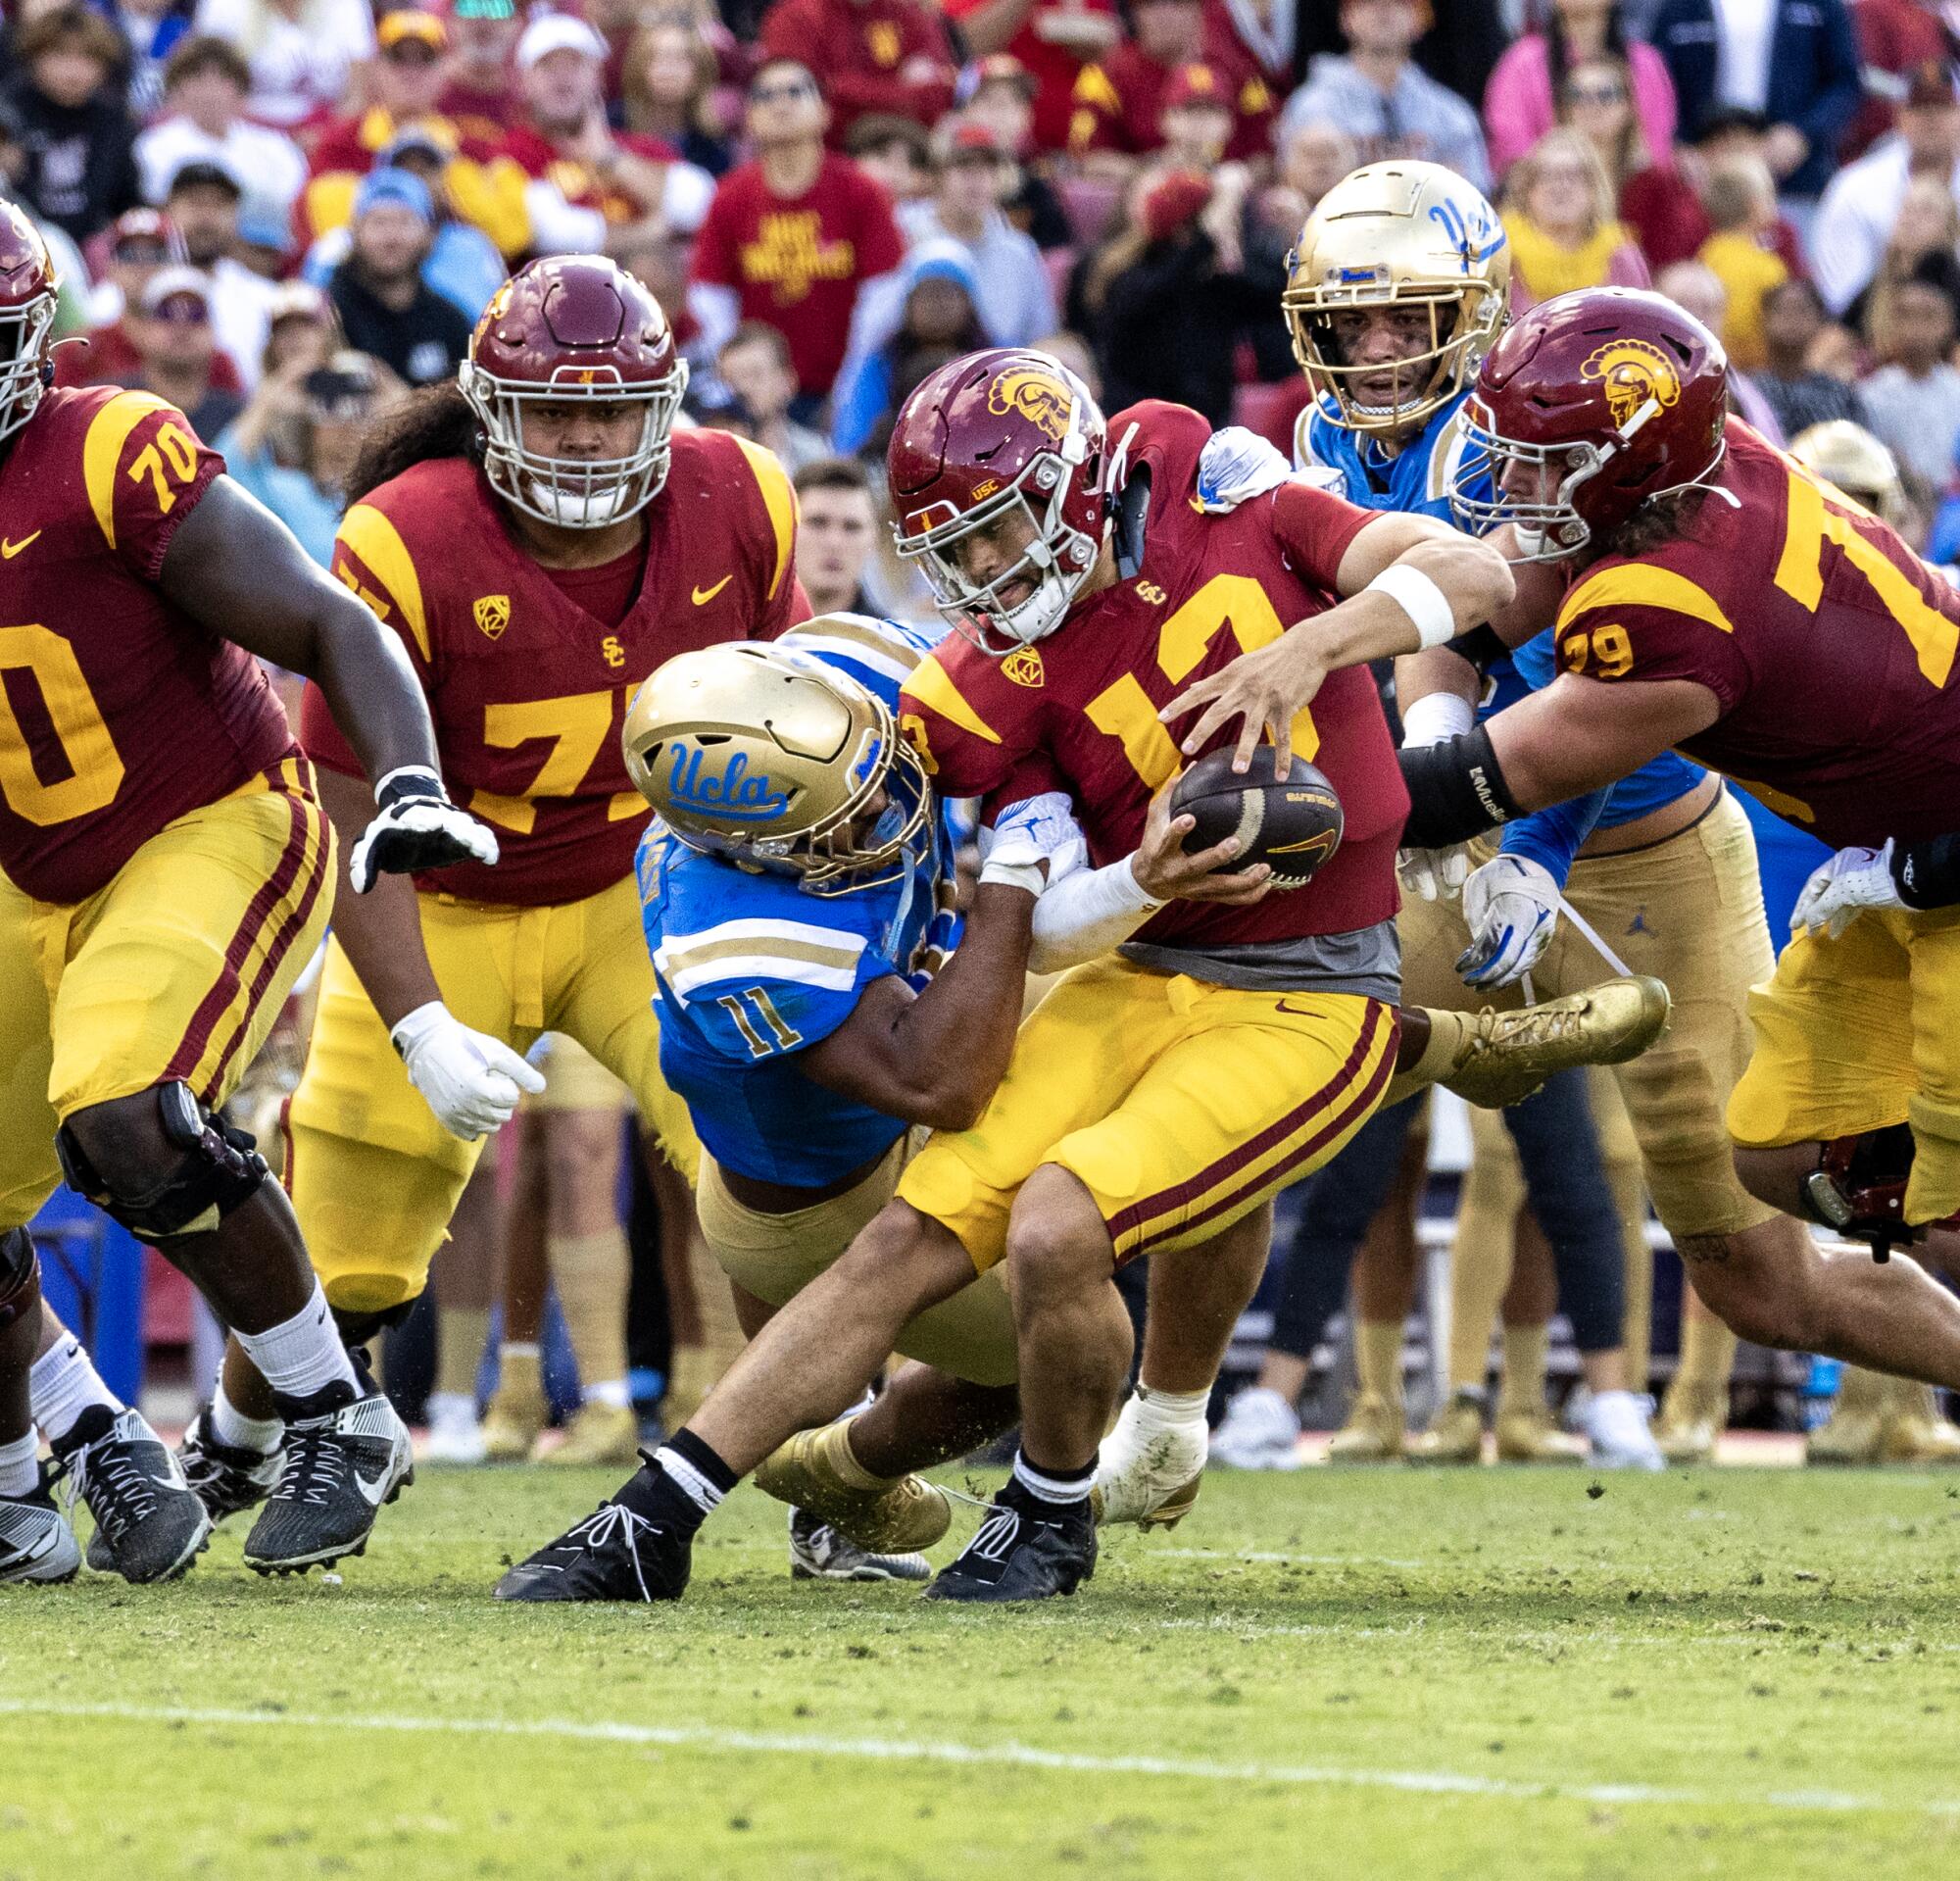 USC quarterback Caleb Williams gets sacked by UCLA's Gabriel Murphy as his teammates look on